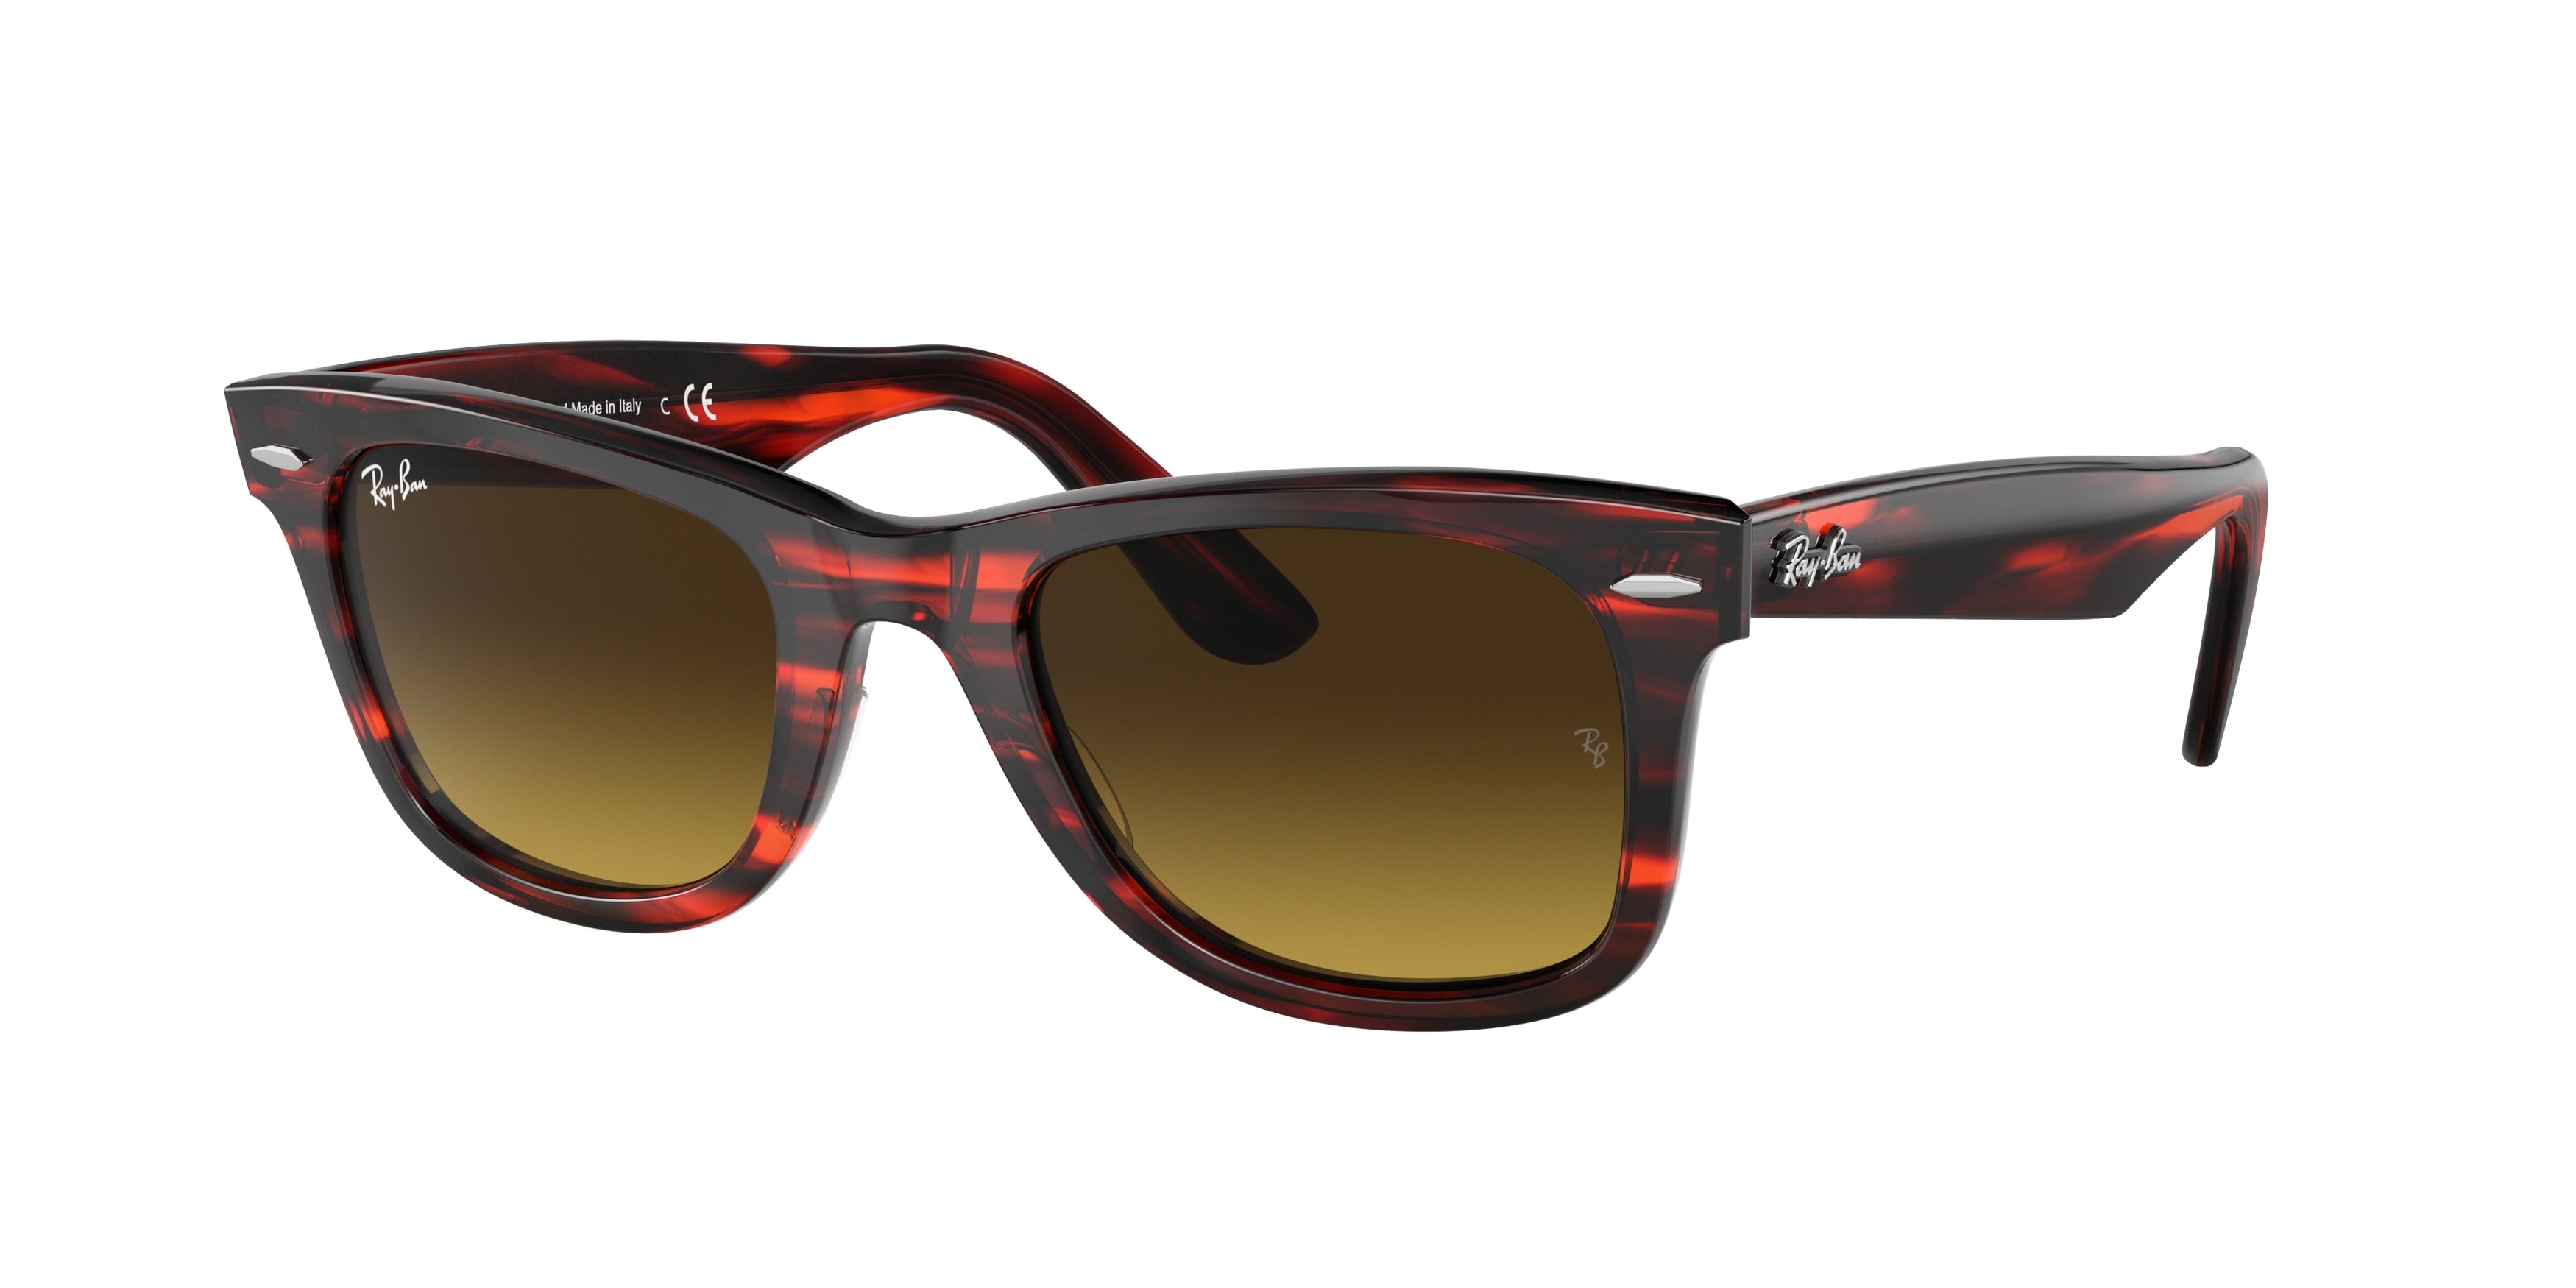 Ray-Ban WAYFARER RB2140 Square Sunglasses  136285-Striped Red 50-150-22 - Color Map Red